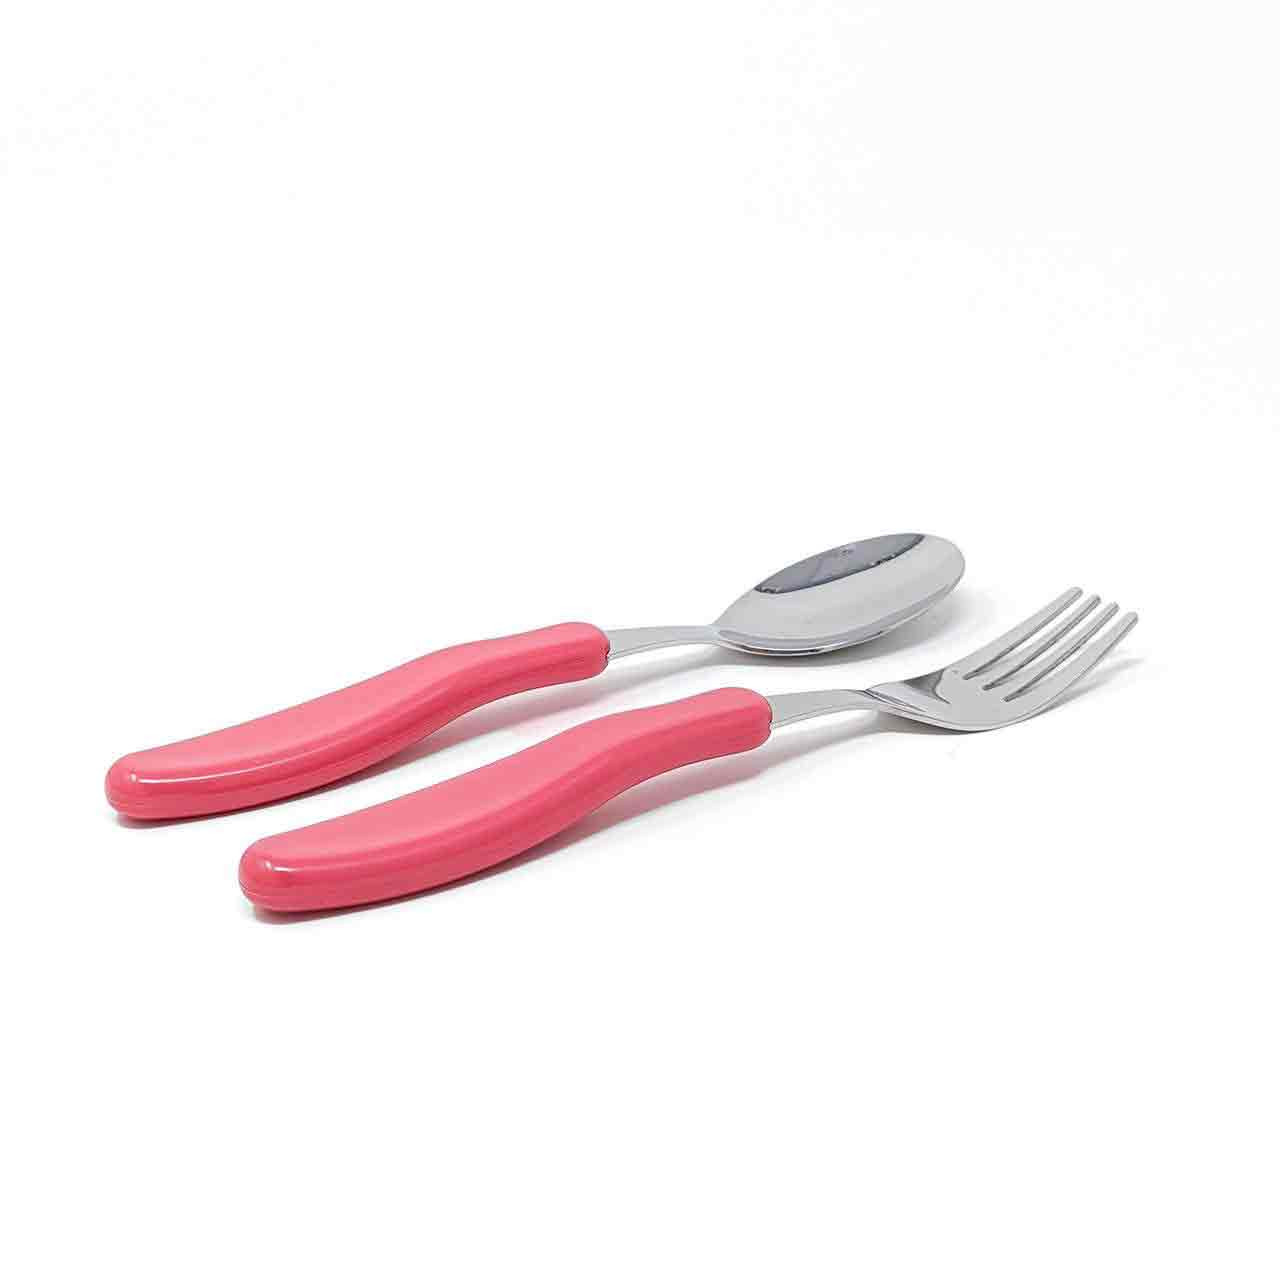 https://cdn11.bigcommerce.com/s-nzx67ee/images/stencil/1280x1280/products/809/6680/innobaby_din_din_smart_ez_grip_spoon_and_fork_set__70231.1669421162.jpg?c=2